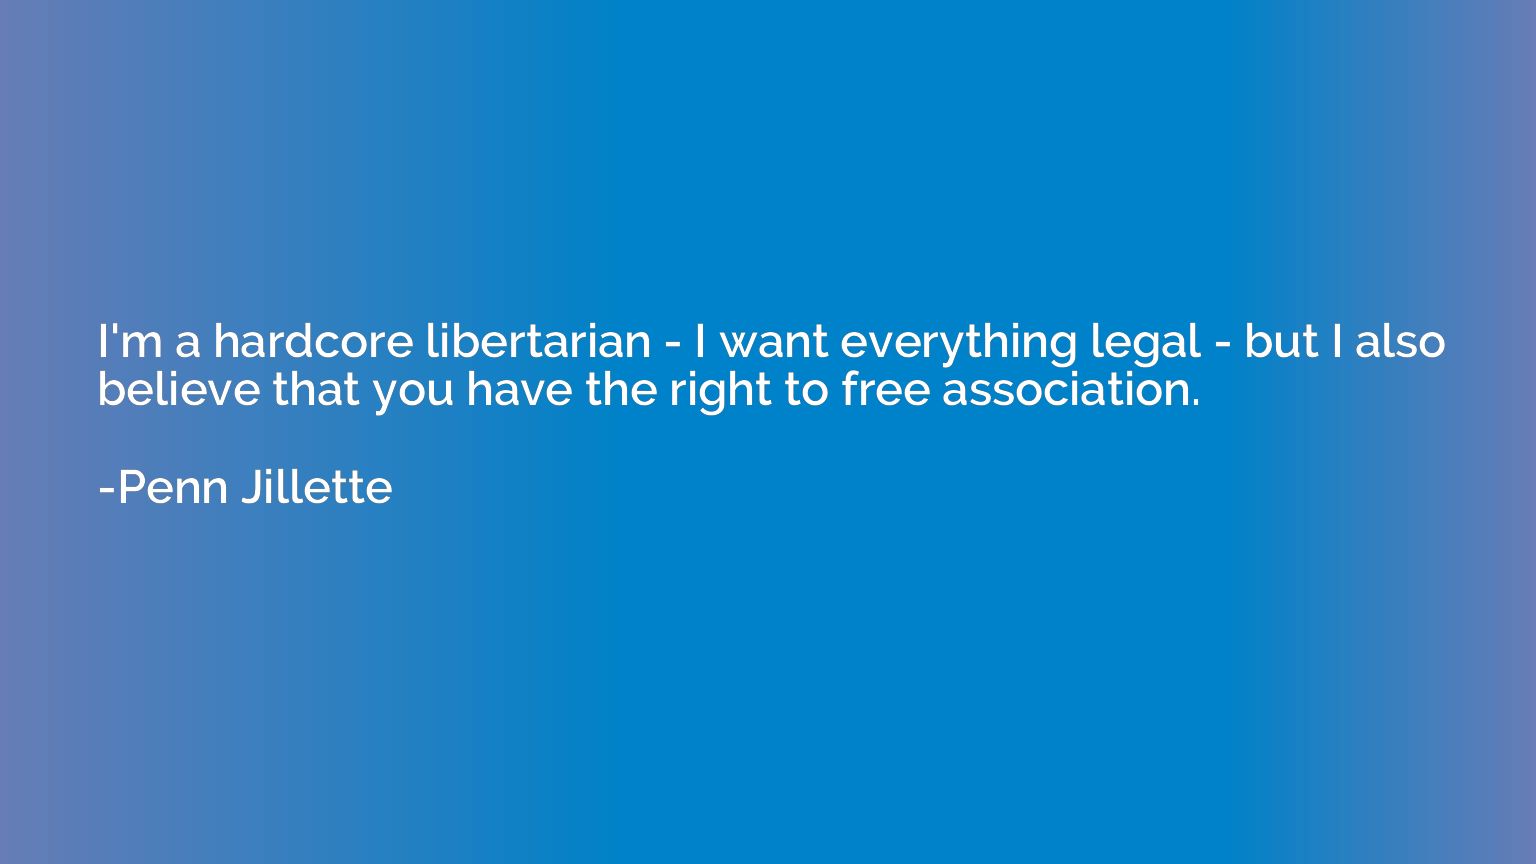 I'm a hardcore libertarian - I want everything legal - but I